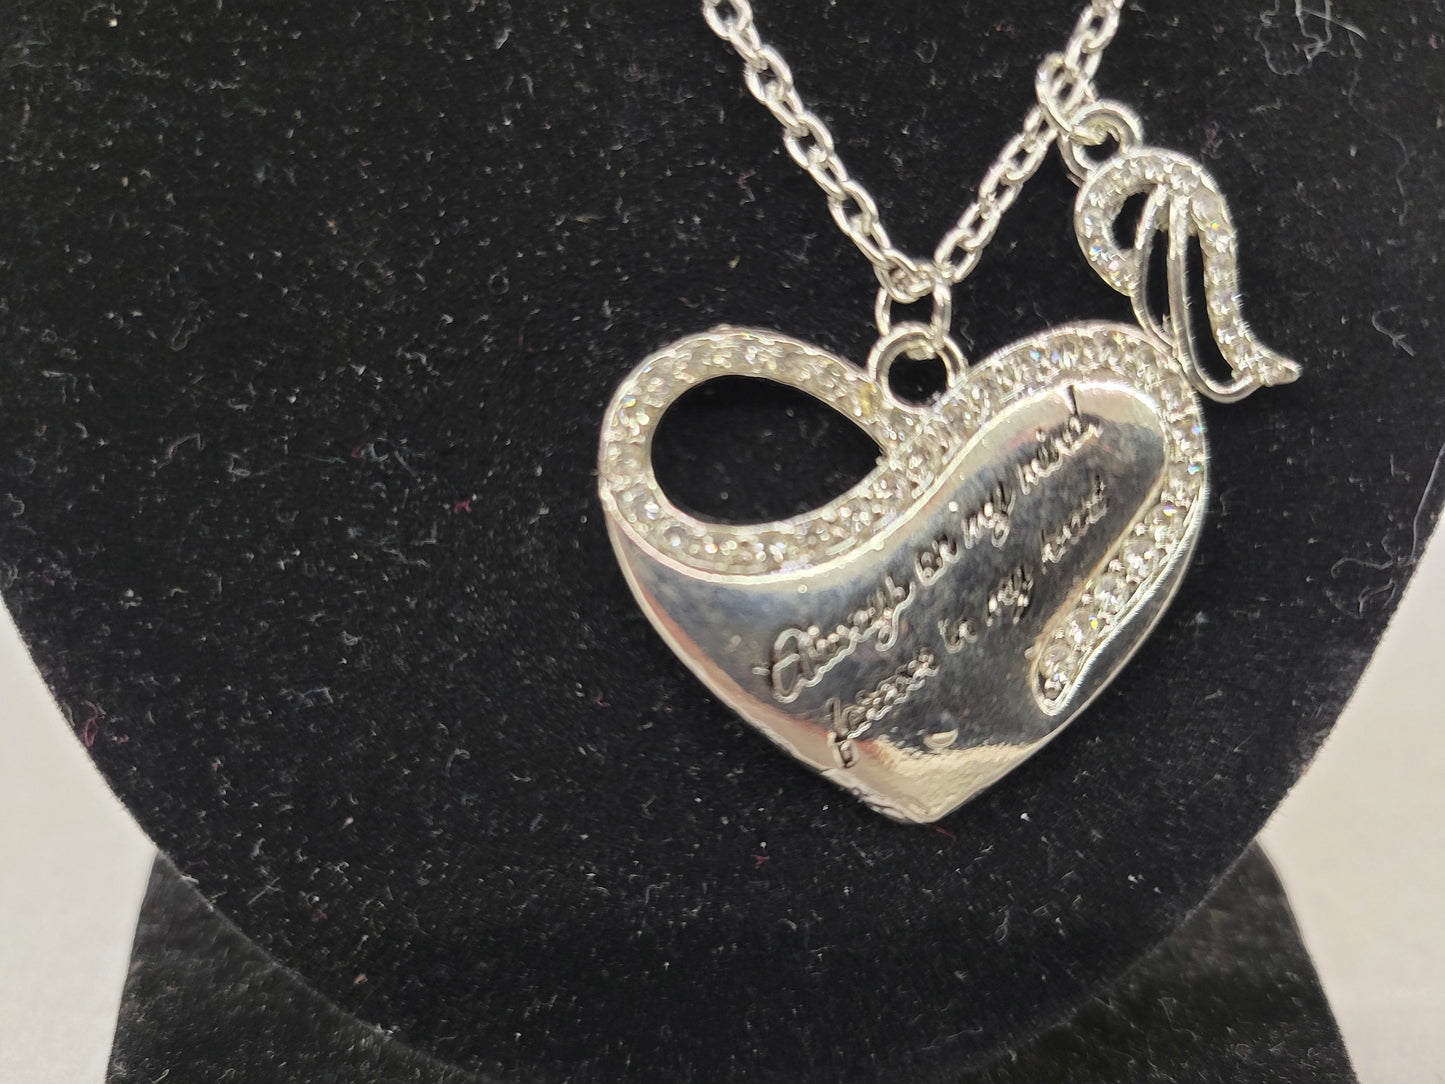 "Always on my mind, Forever in my heart" Necklace